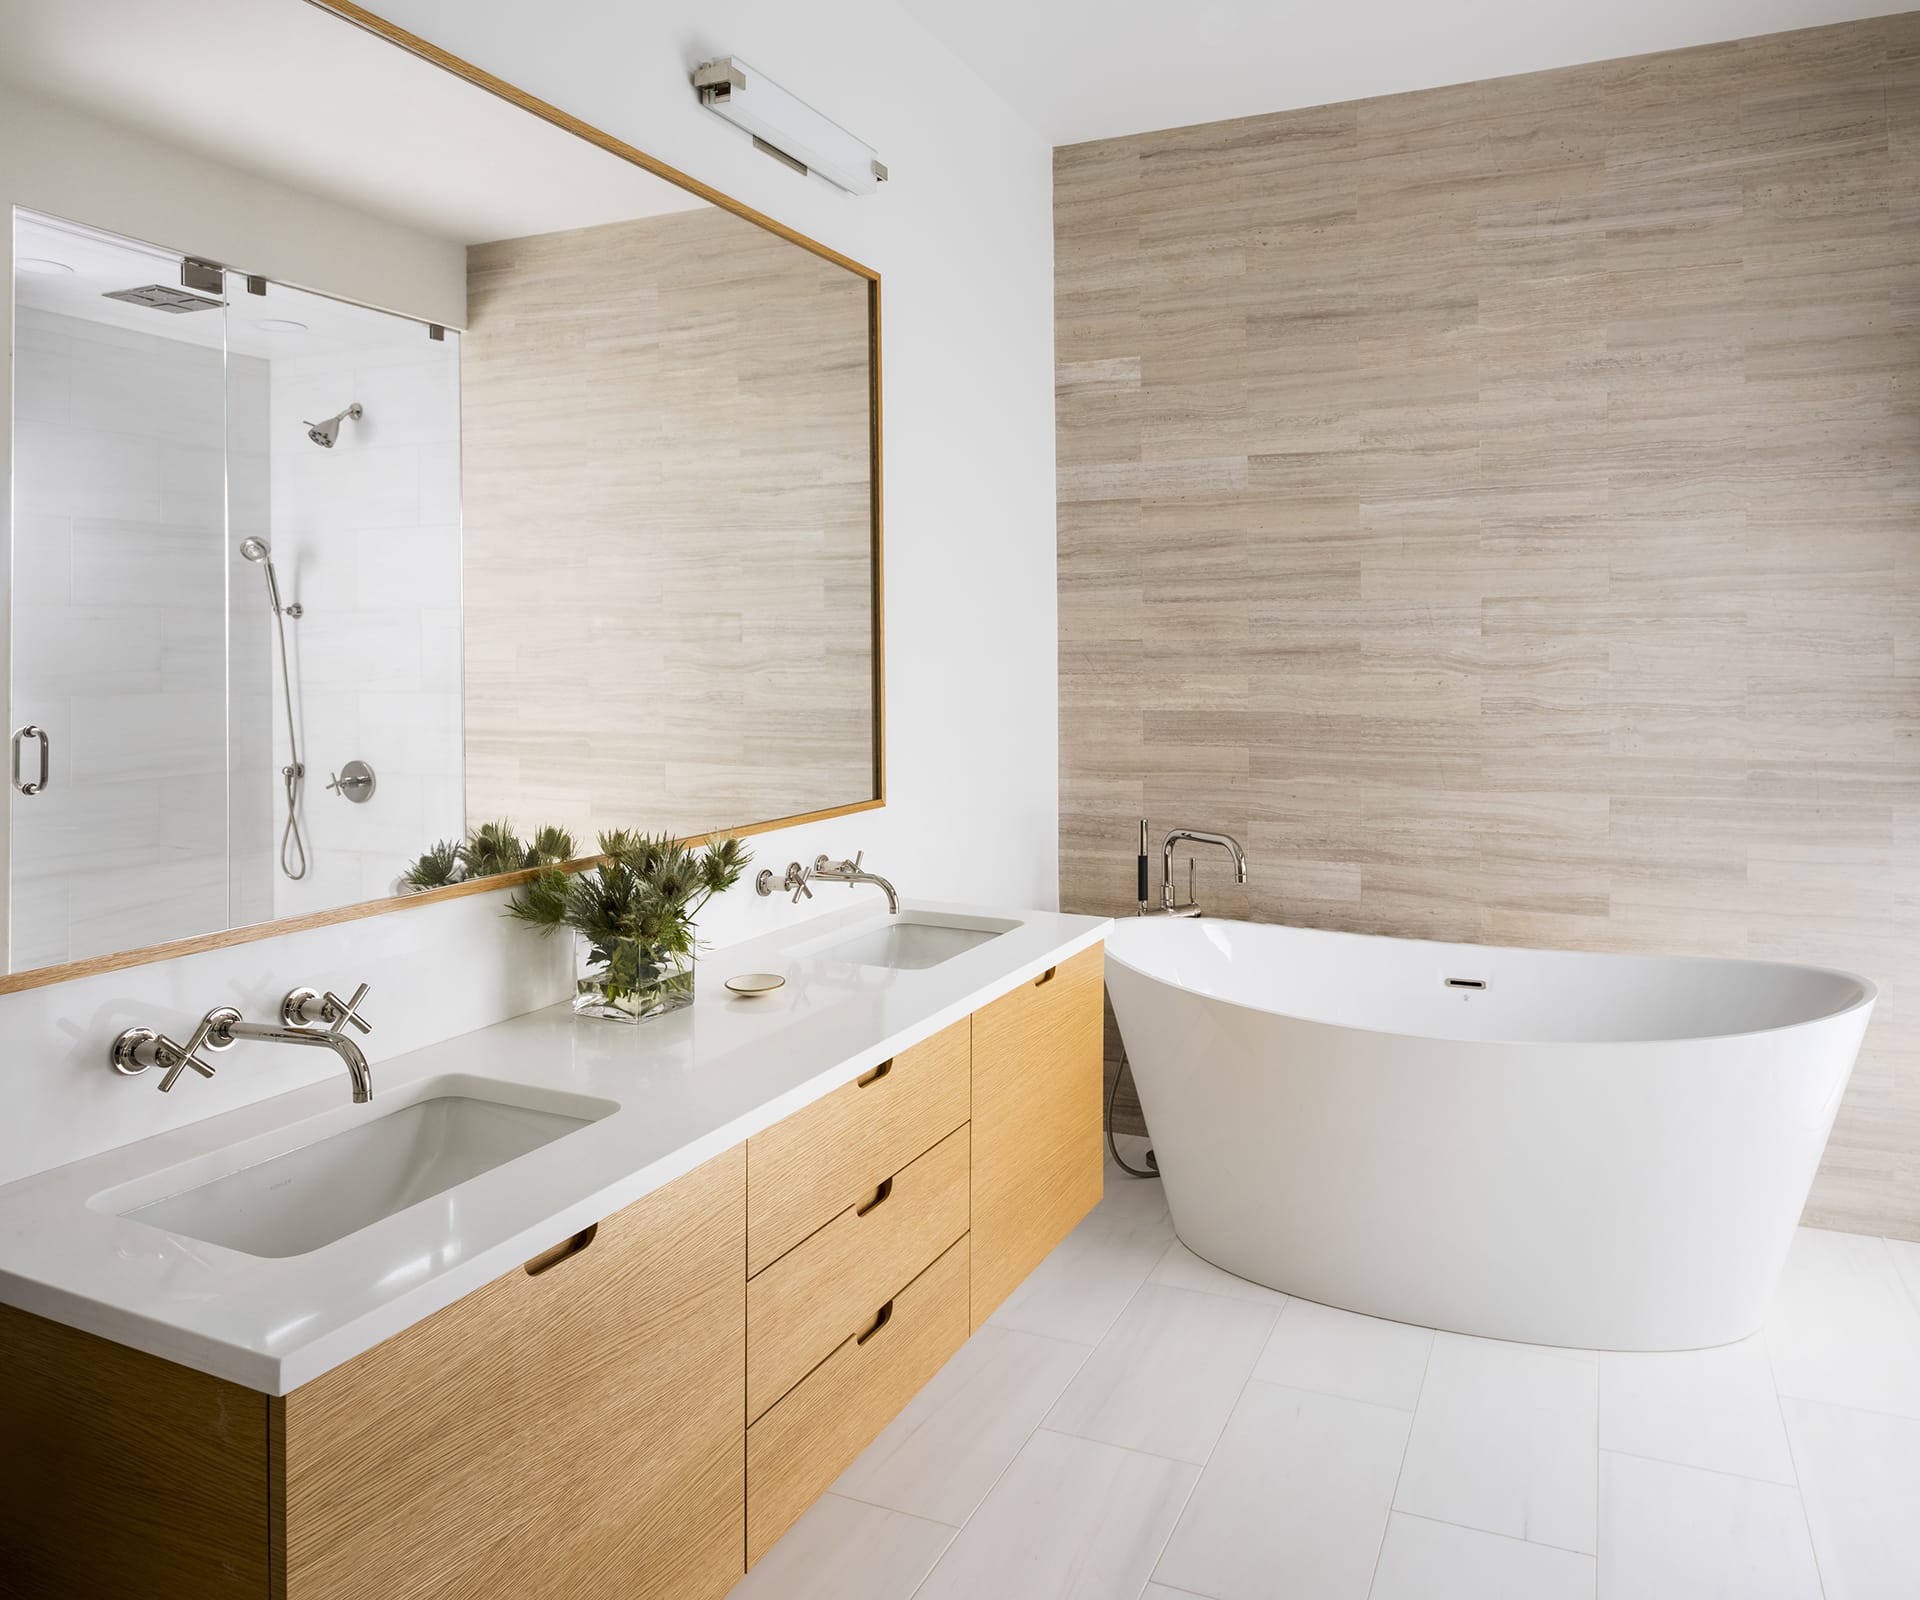 Primary bathroom with a large wood vanity and matching mirror, freestanding white tub, and one tan tile accent wall